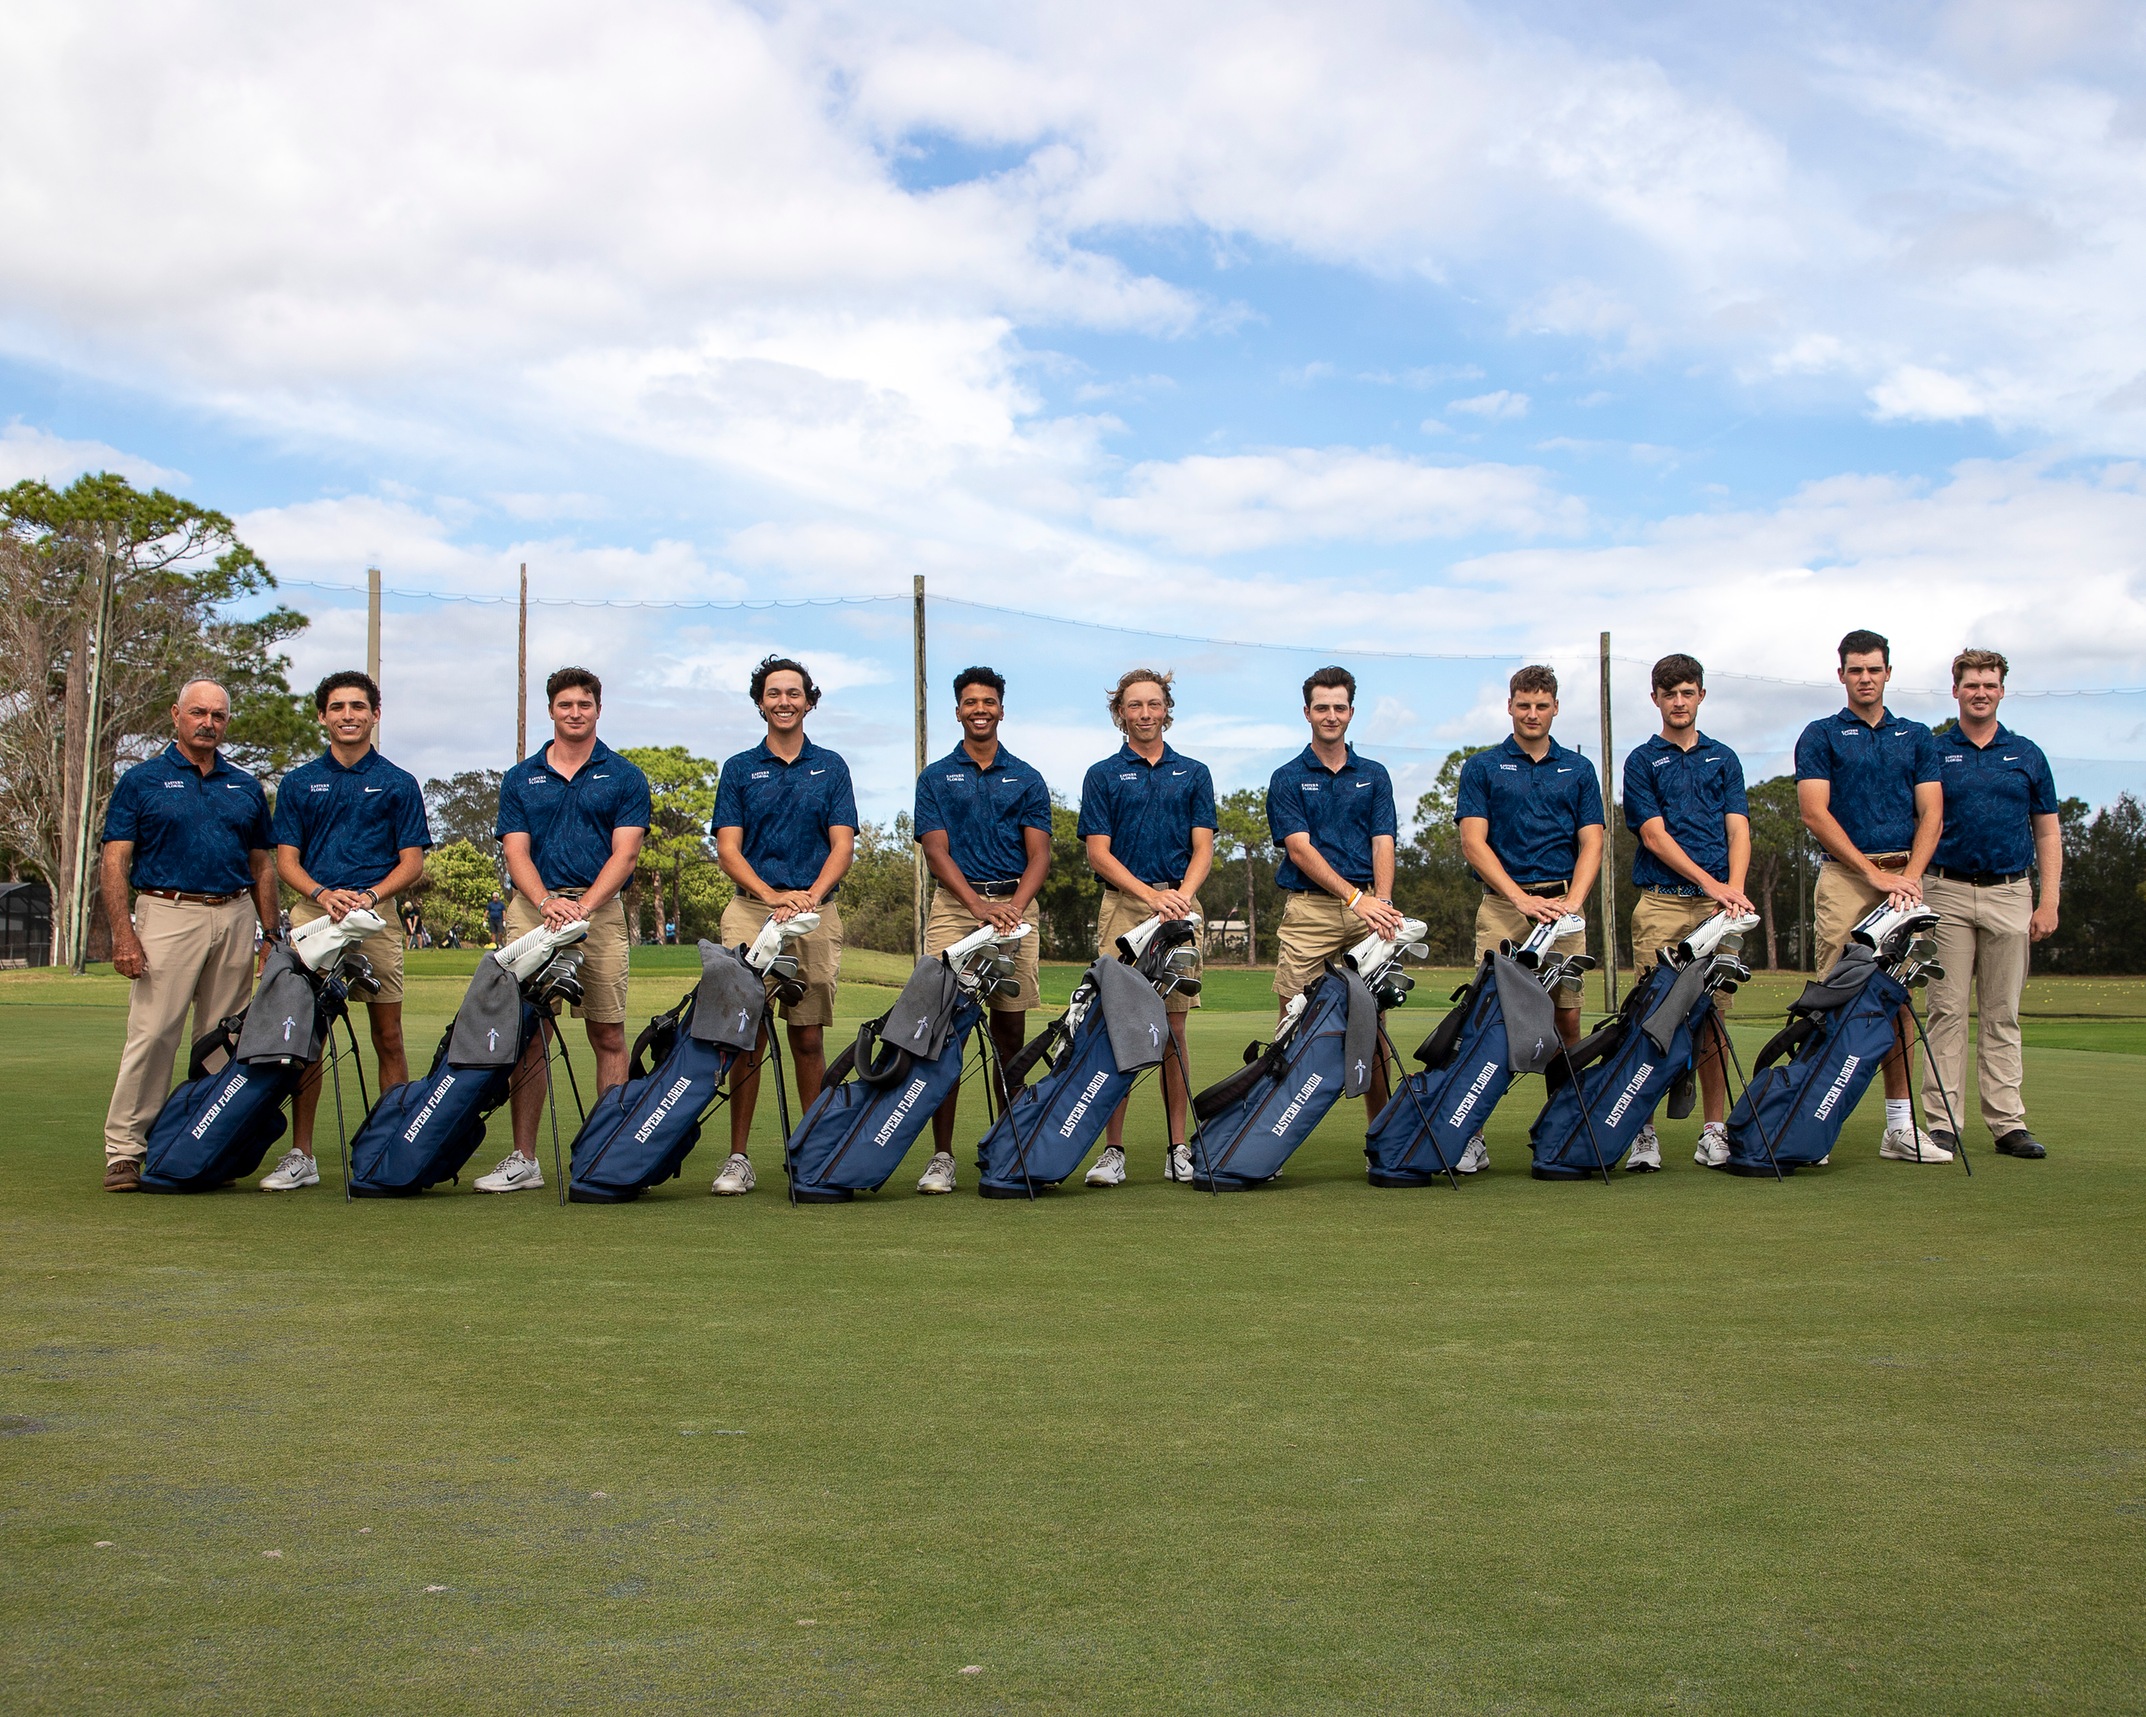 Men's golf team places 13th at Battle at the Shores event